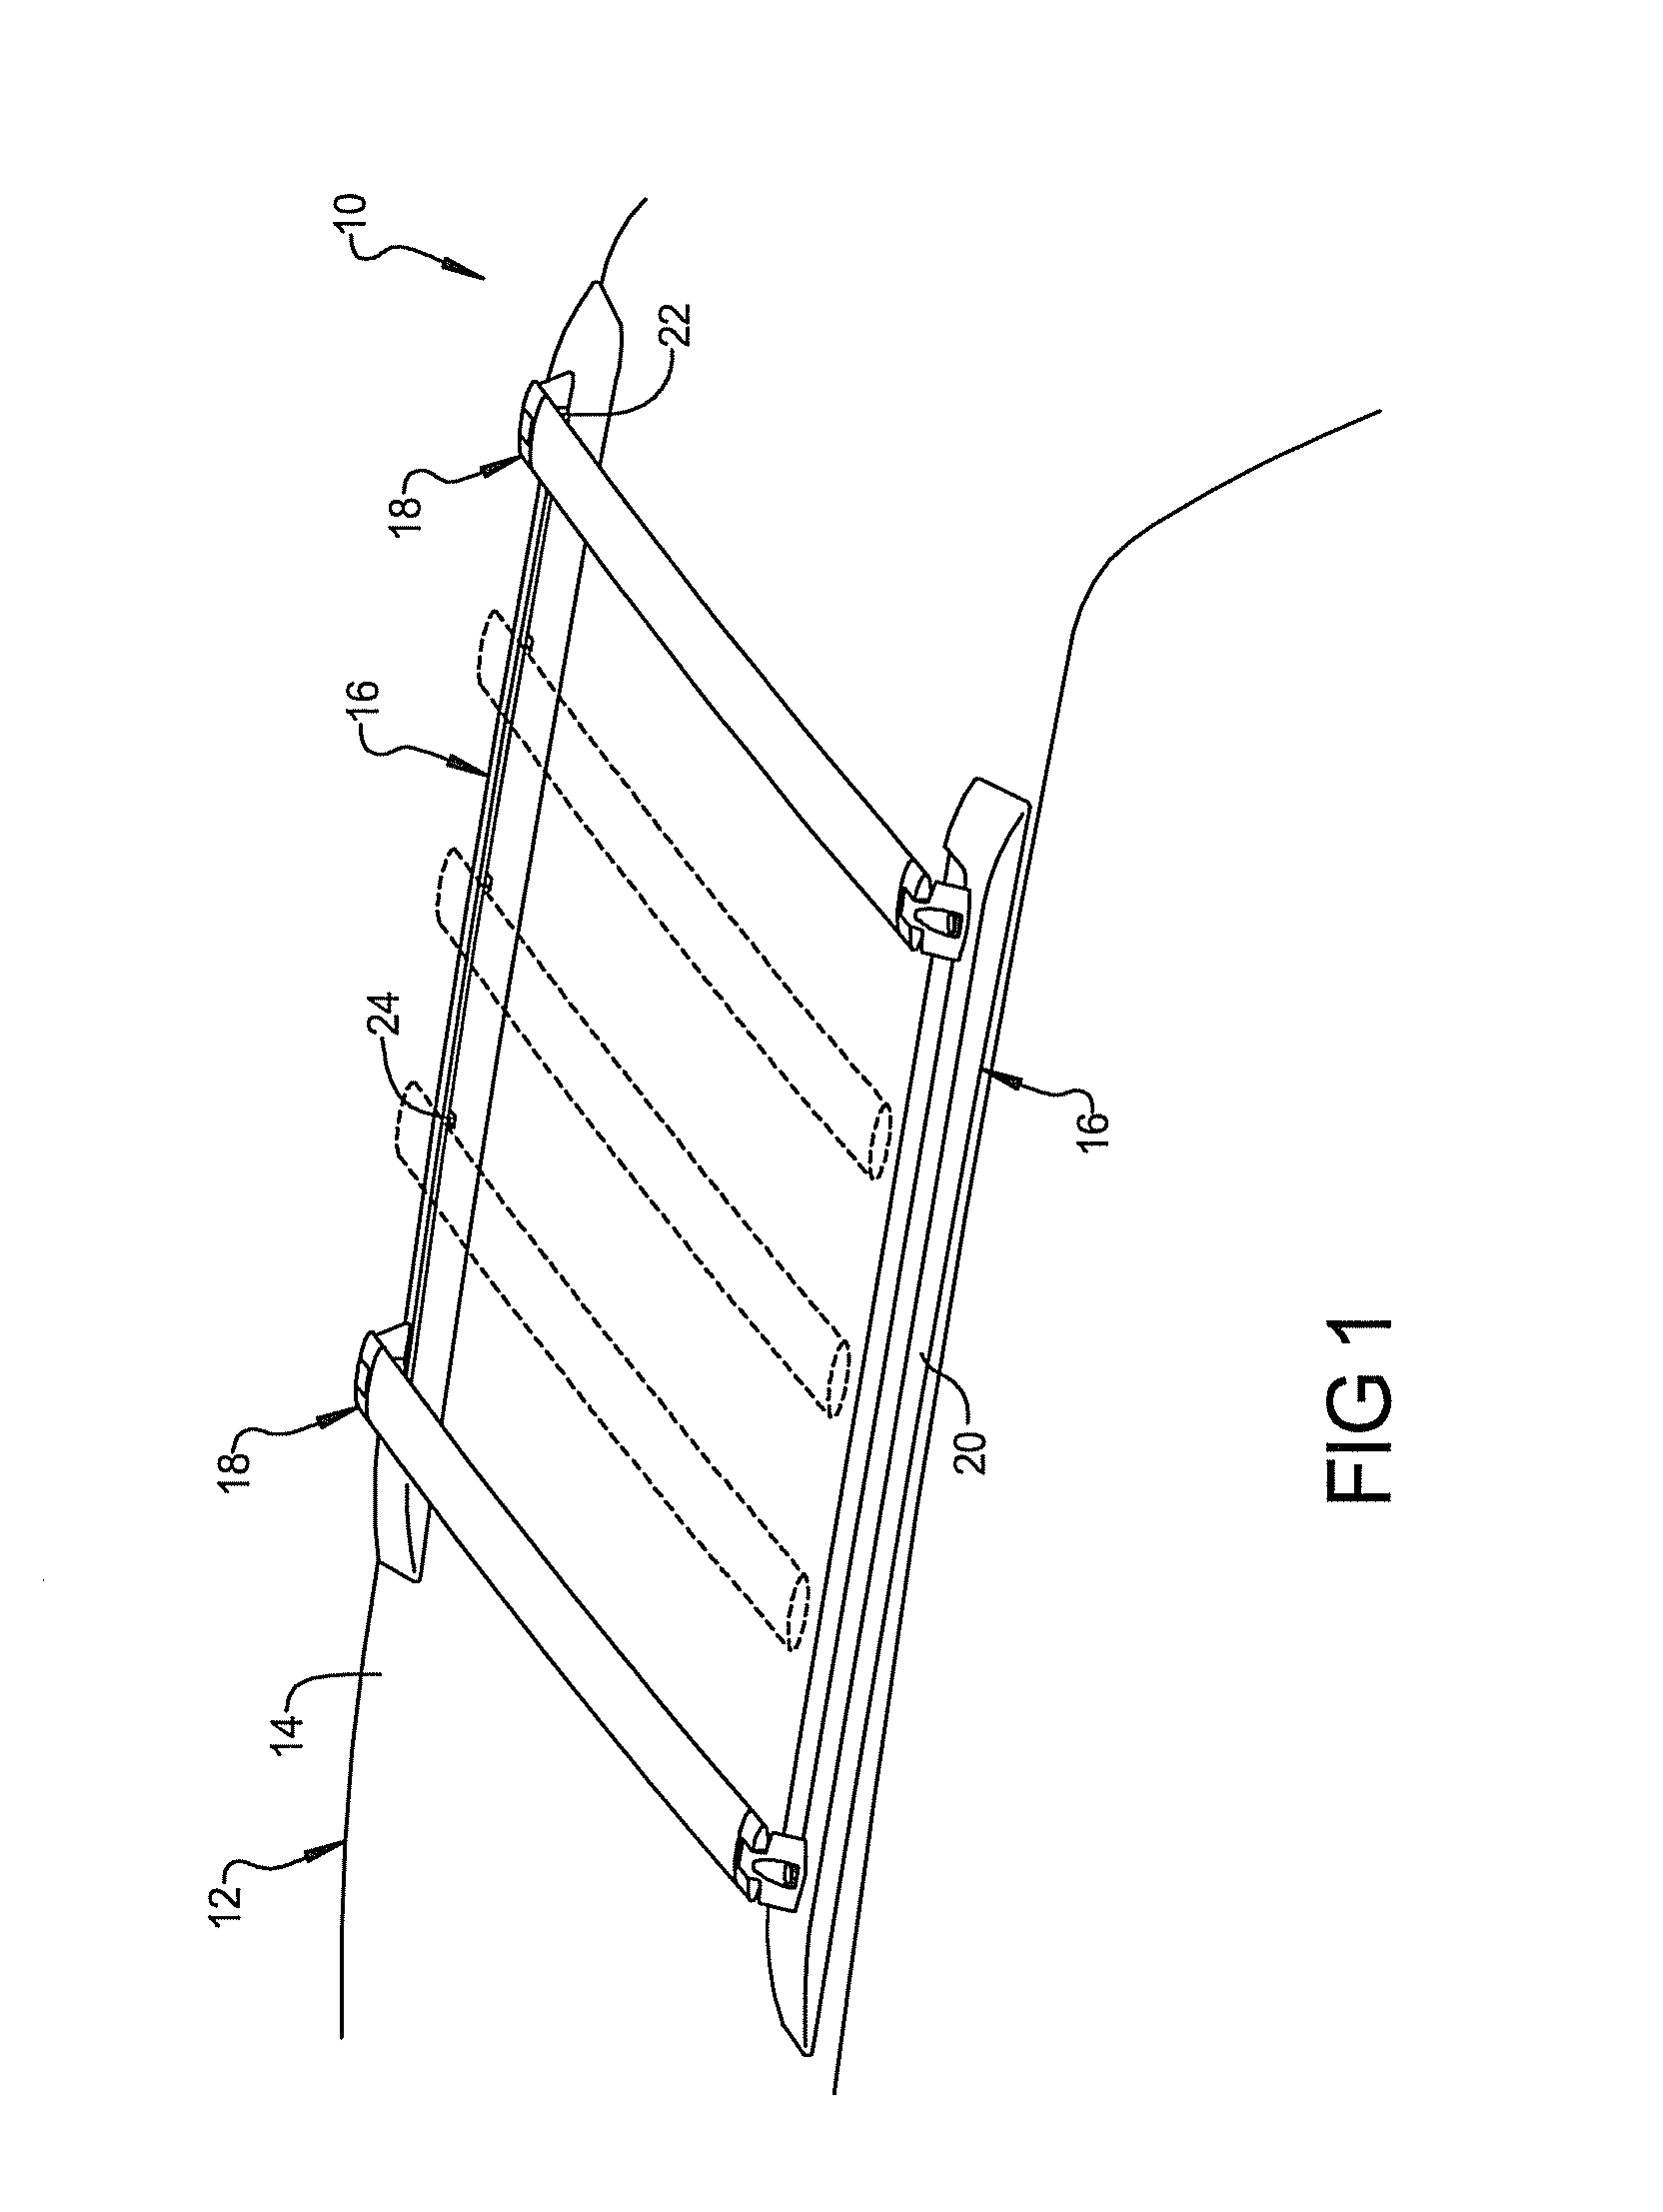 System and method for vehicle article carrier having stowable cross bars